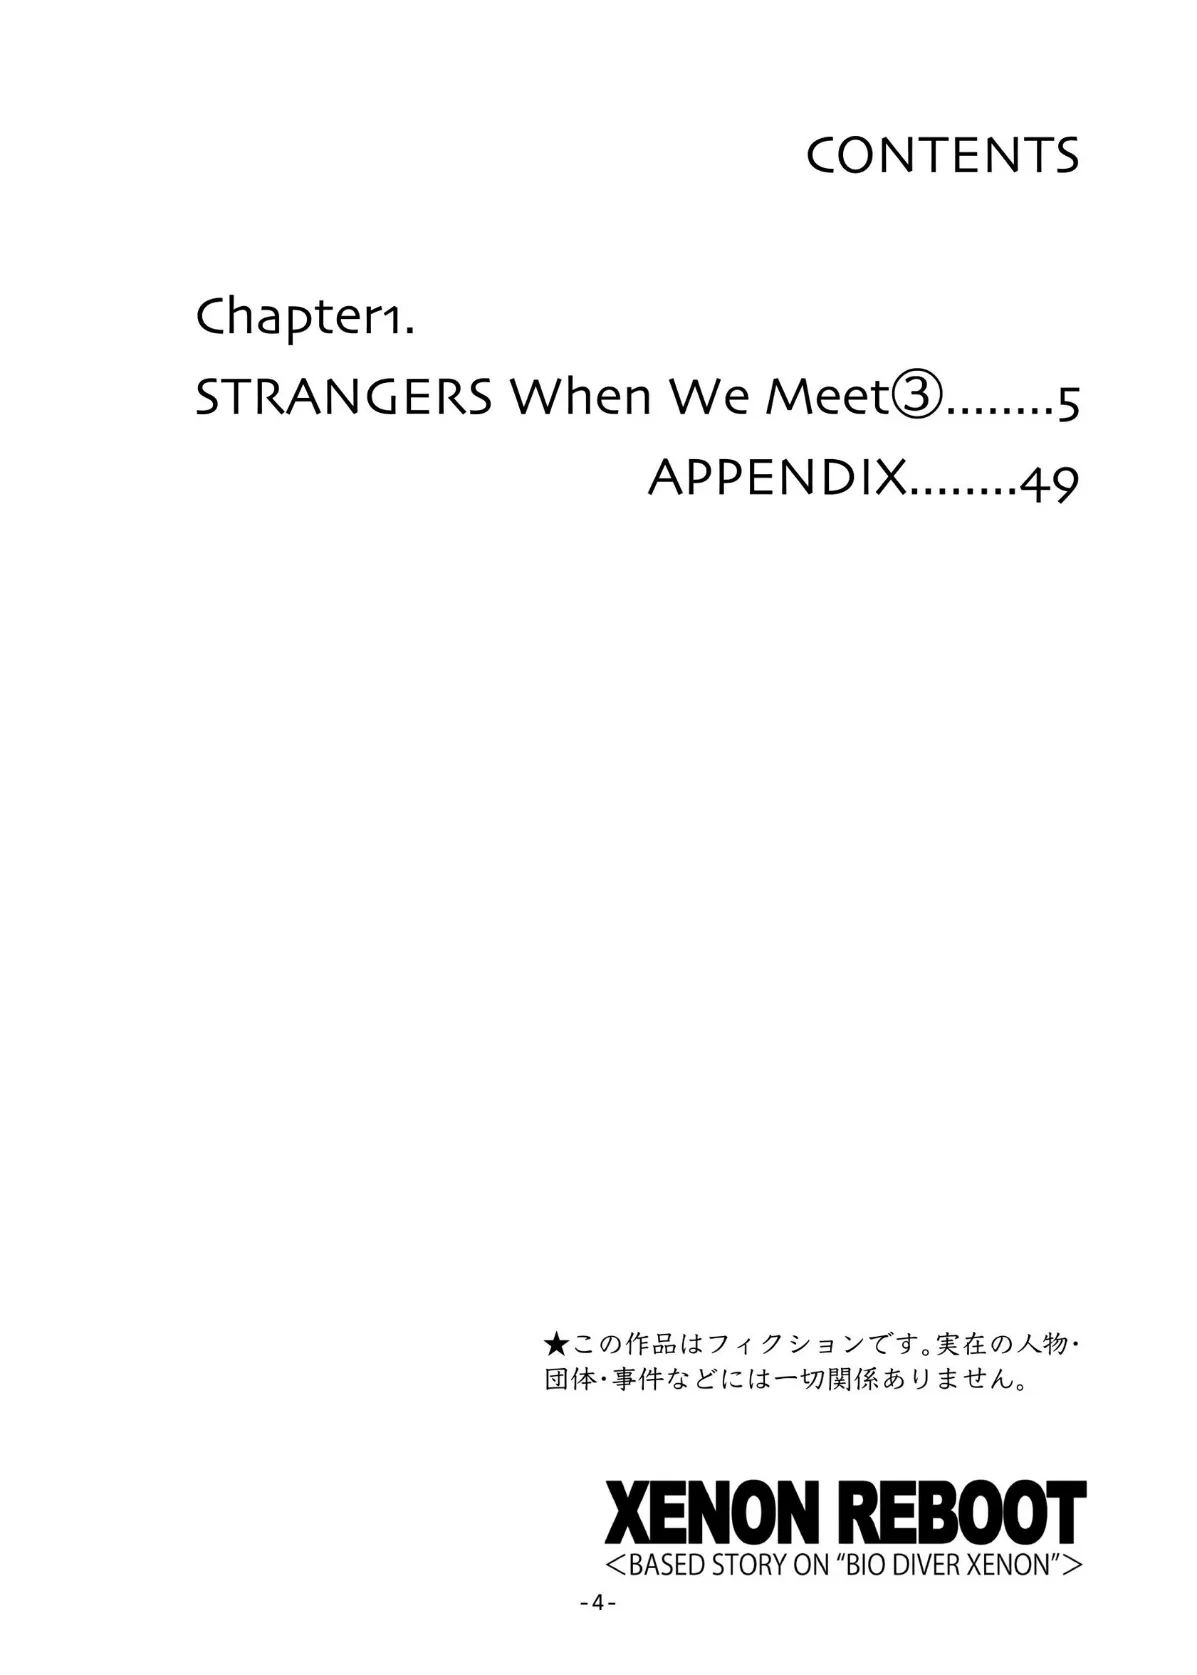 XENON REBOOT＜BASED STORY ON ’BIO DIVER XENON’＞【分冊版】 Chapter1 STRANGERS When We Meet（3） 4ページ